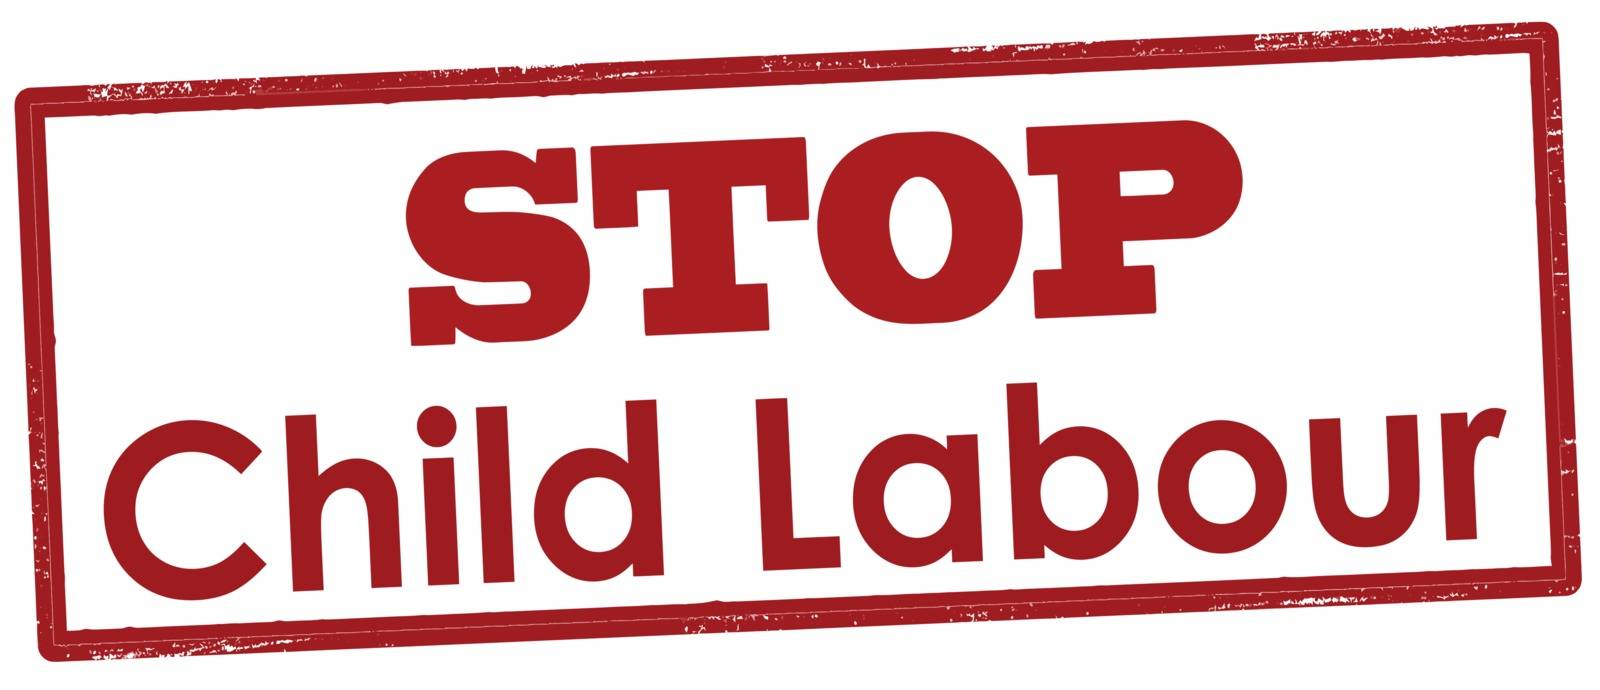 Rubber stamp with text stop child labour inside, vector illustration